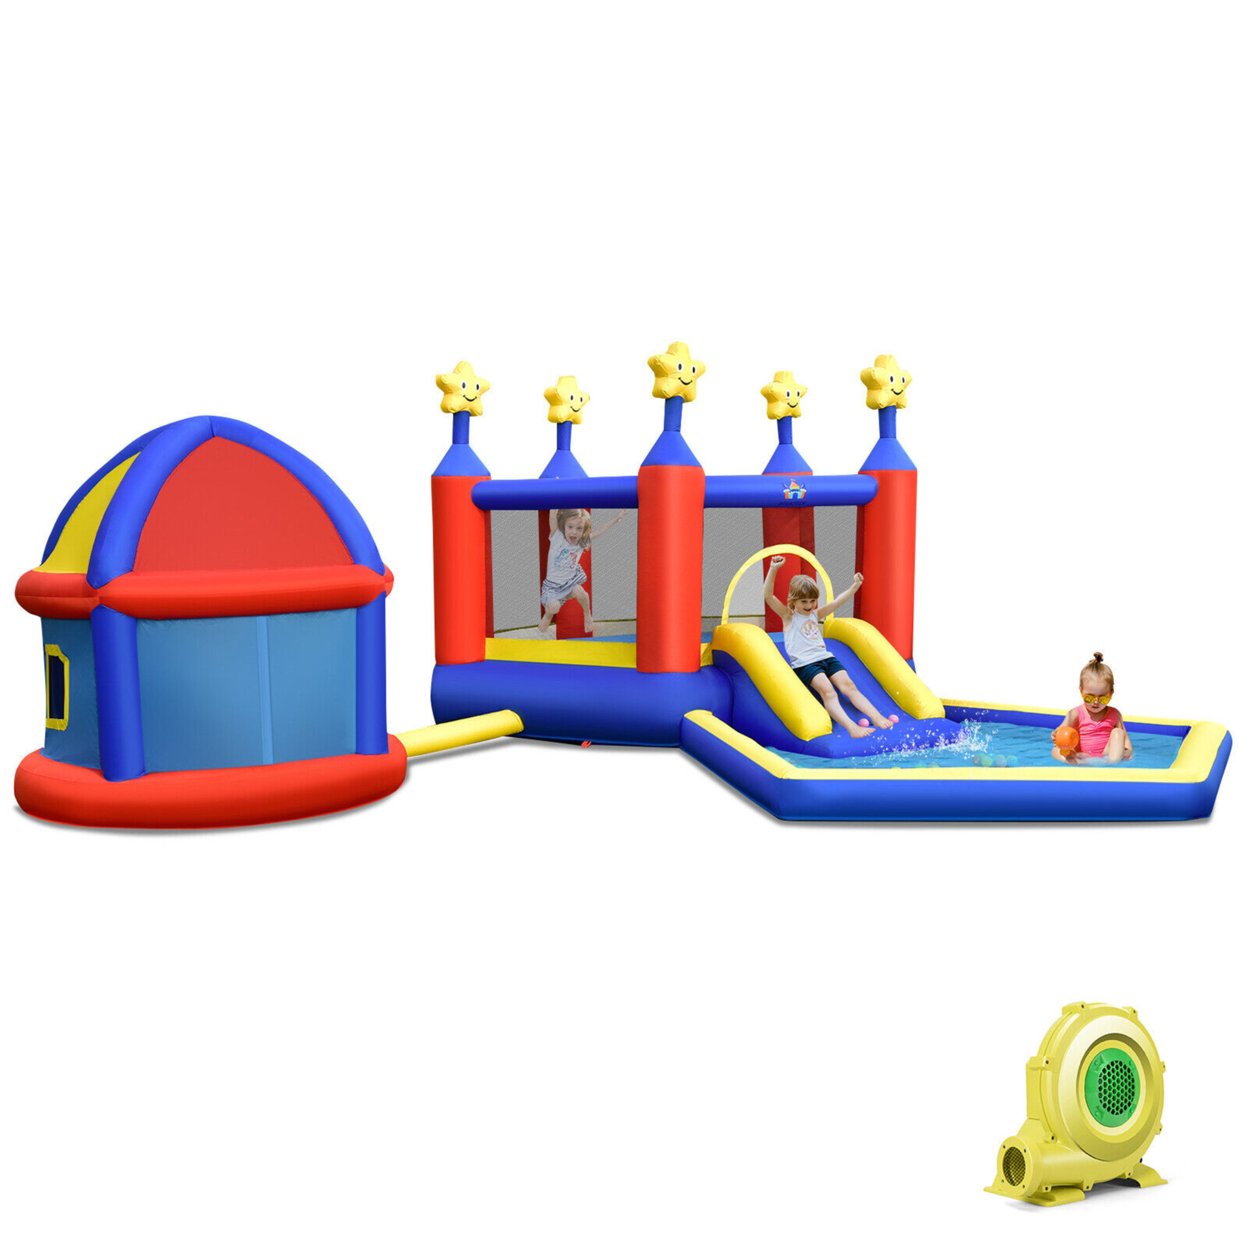 Kids Inflatable Bouncy Castle W/Slide Large Jumping Area Playhouse & 735W Blower